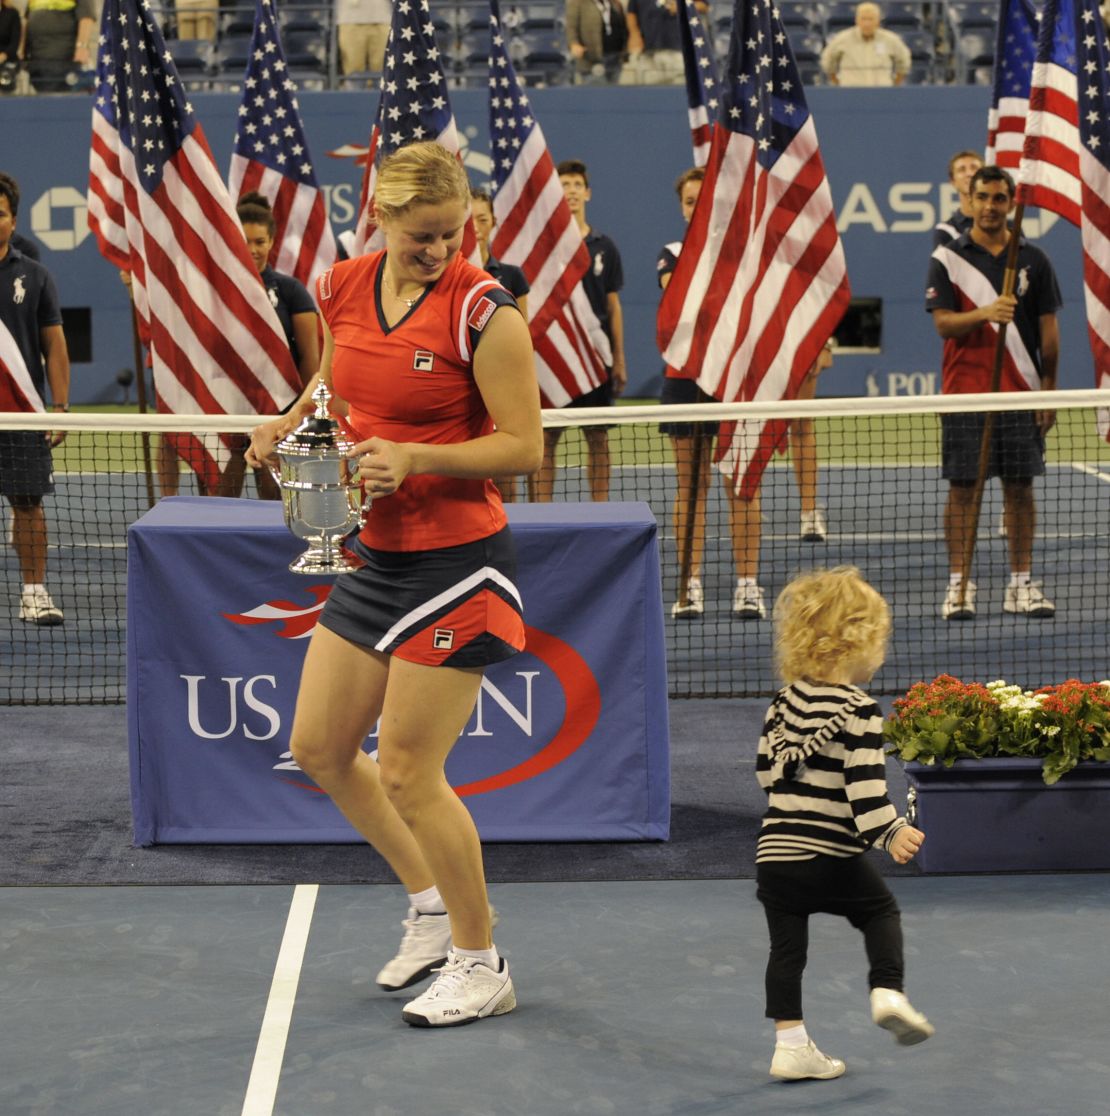 Kim Clijsters celebrates on court with her daughter, Jada, at the US Open in 2009